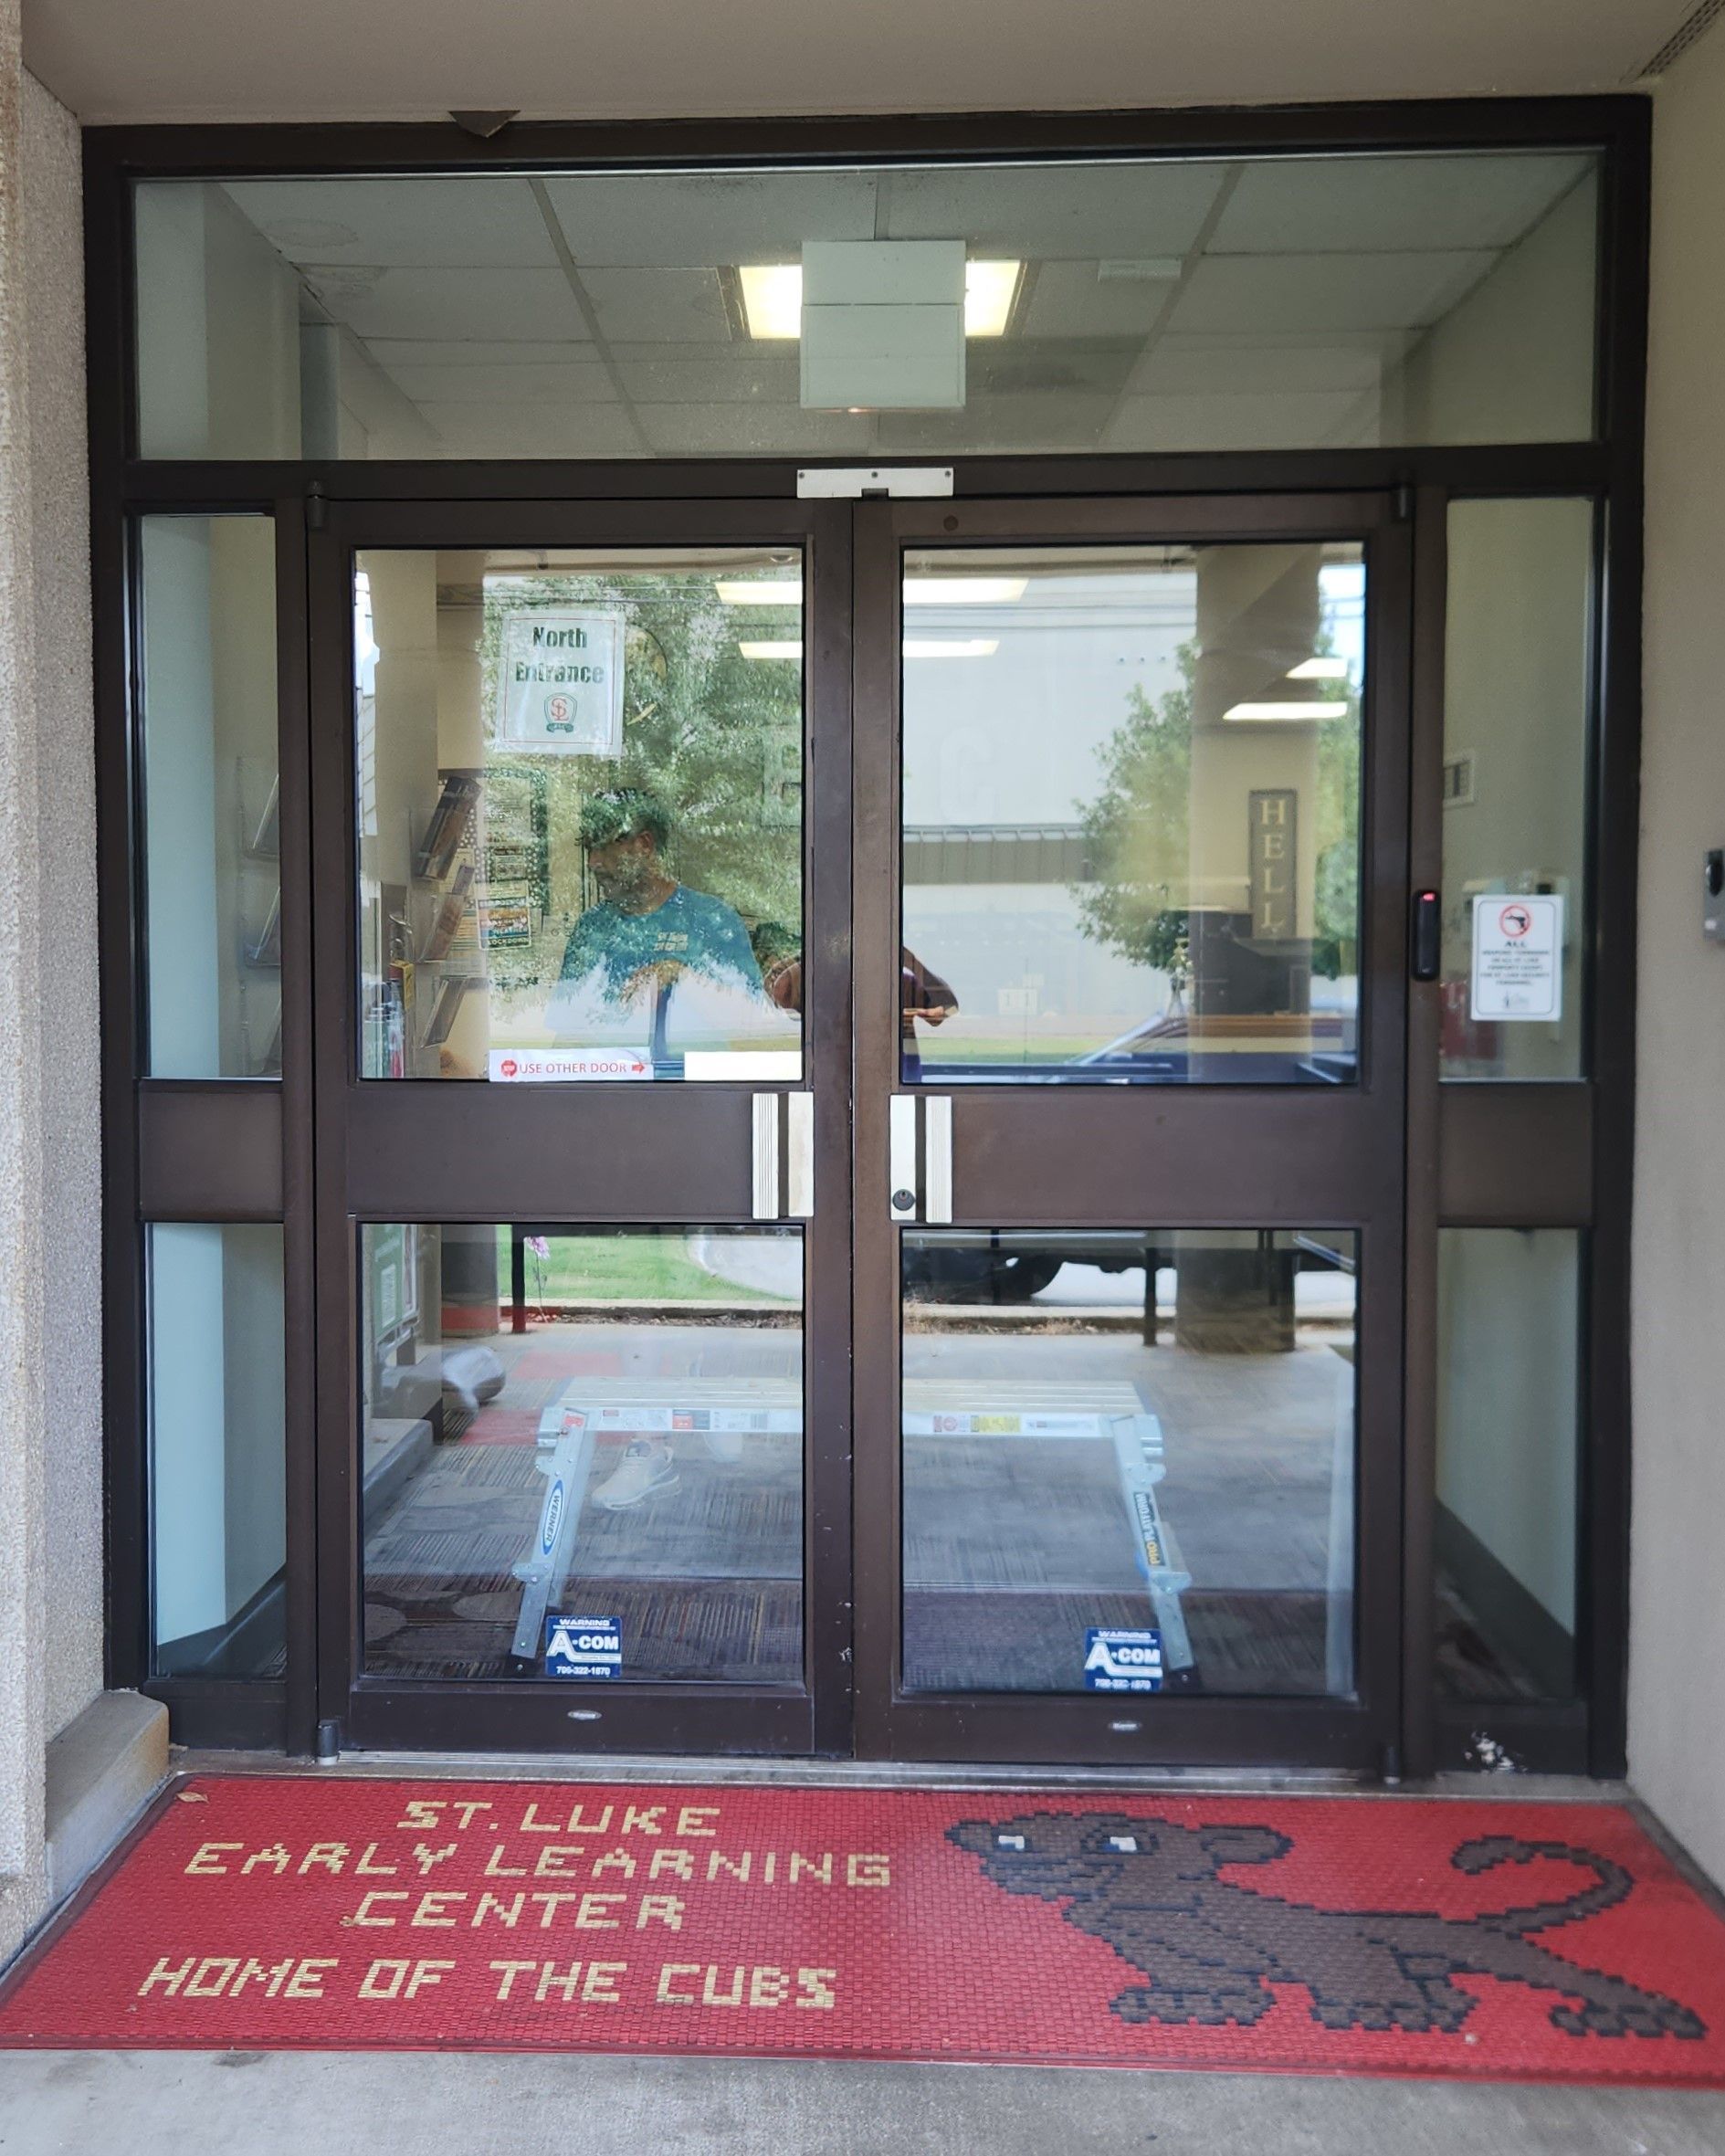 Now everyone is safe inside the school glass doors or windows. With SPF Ultimate Security L3 